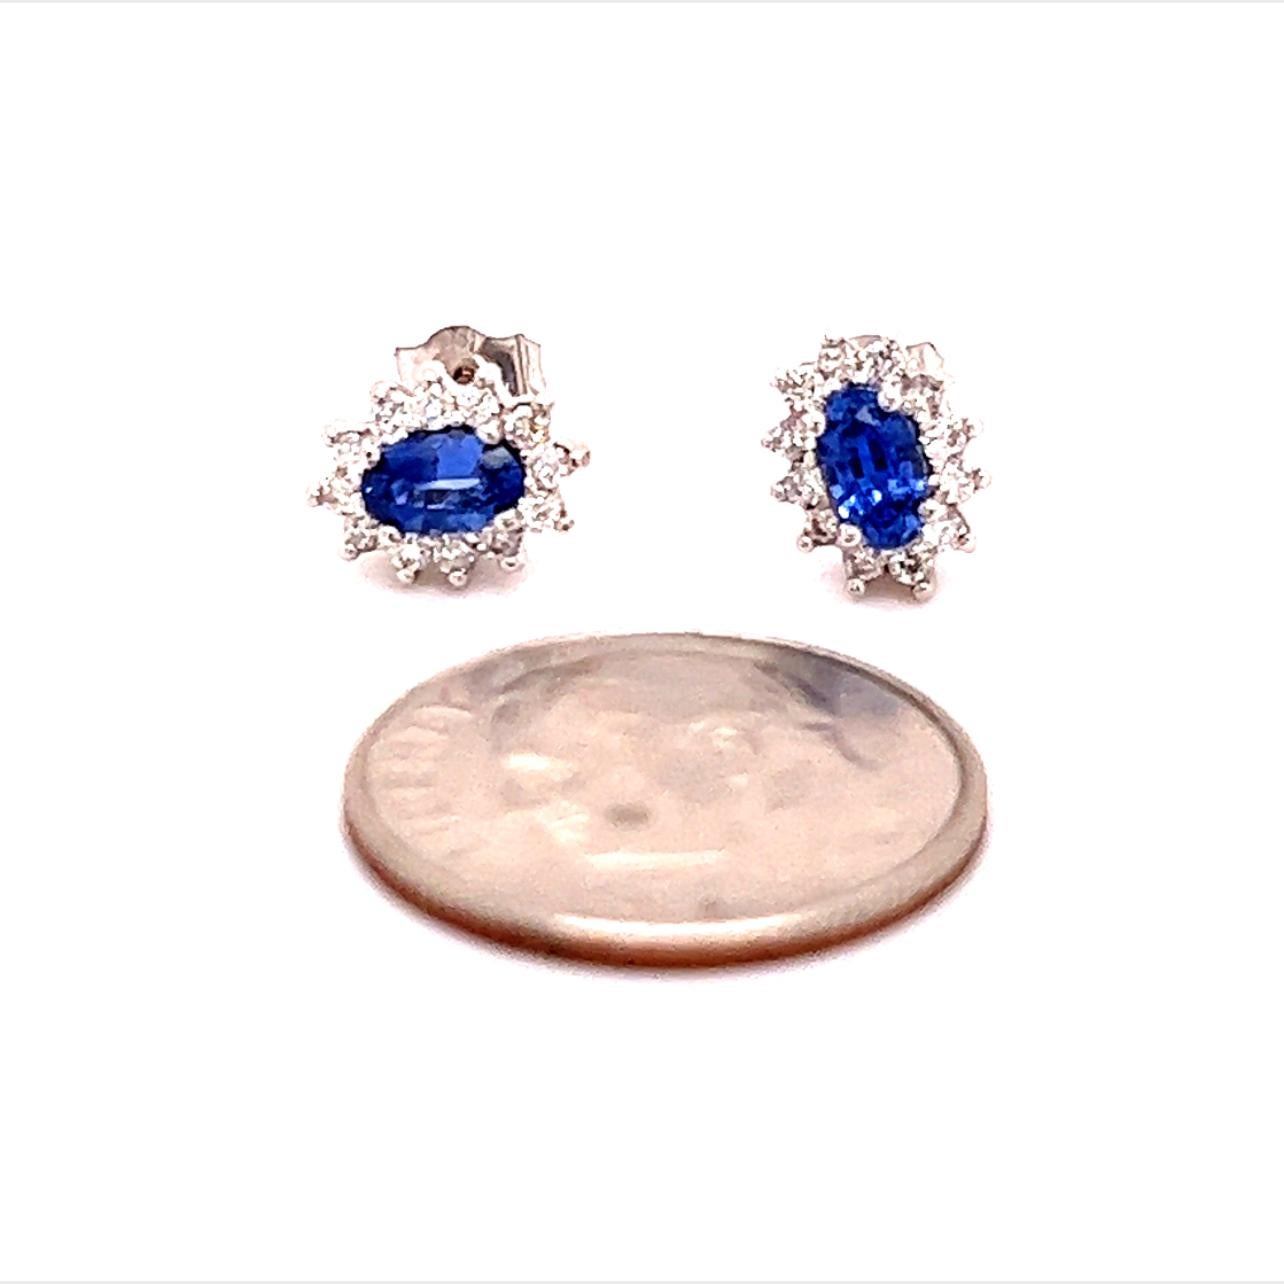 Oval Cut Natural Sapphire Diamond Stud Earrings 14k Gold 0.90 TCW Certified For Sale